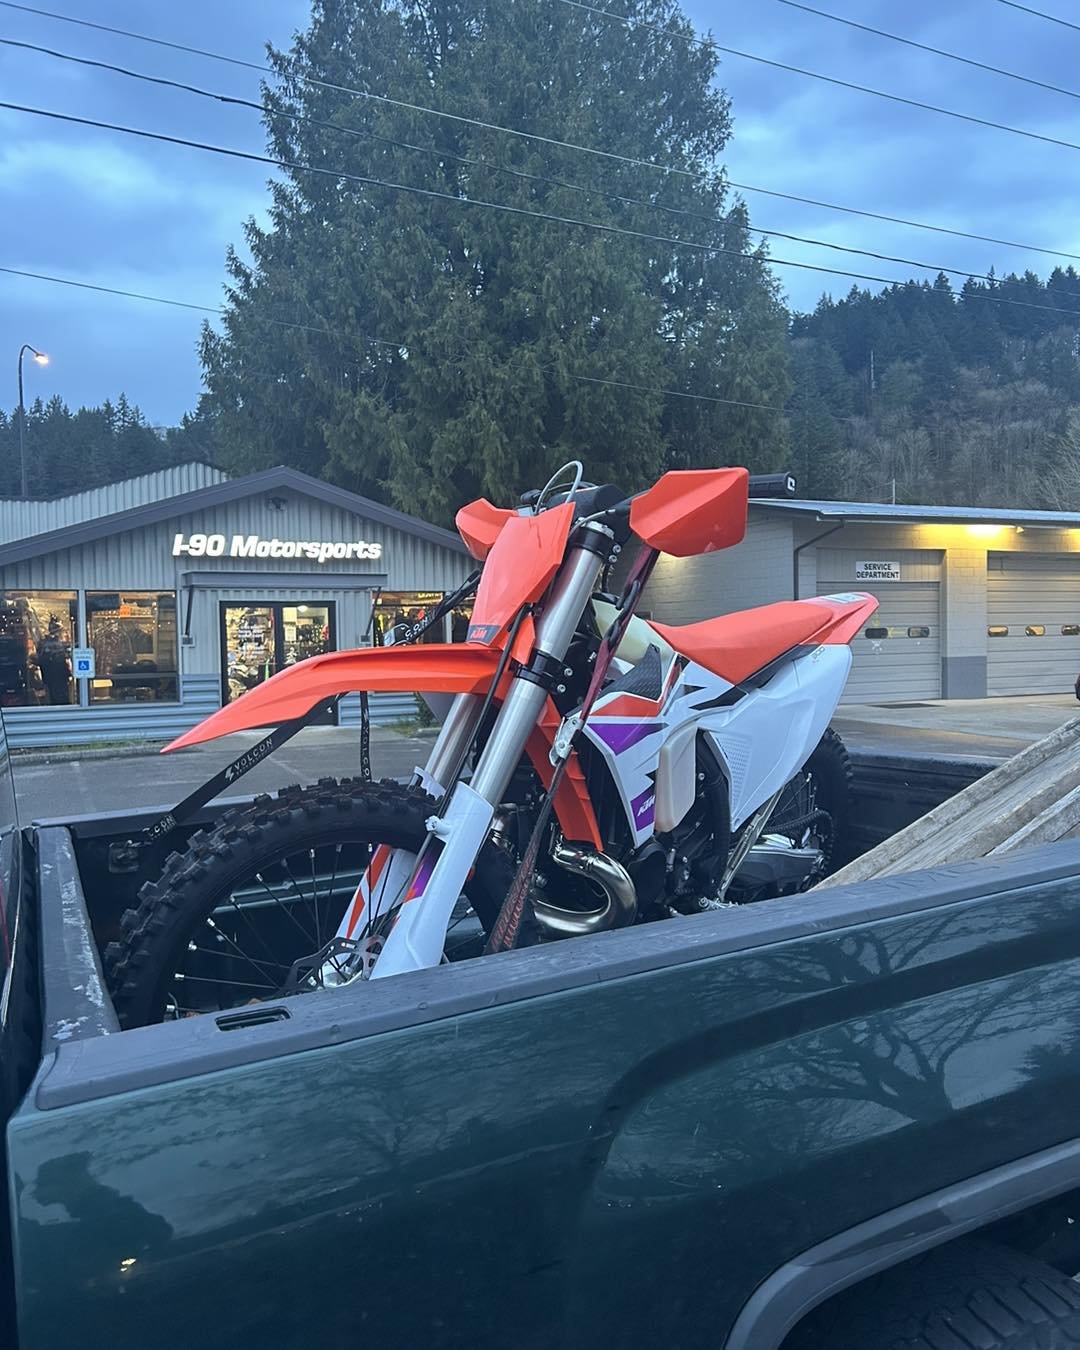 We added a new bike to the fleet today! 2024 KTM 300XC. Come test it out for $300 a day! #ktm #300xcw #dirt #dirtbikes #adventure #dirtbike #washington #bike #dirtbikerental #ktm300 #washingtonstate #enduro #ktm300xcw #ktm300xc #enduro #hardenduro